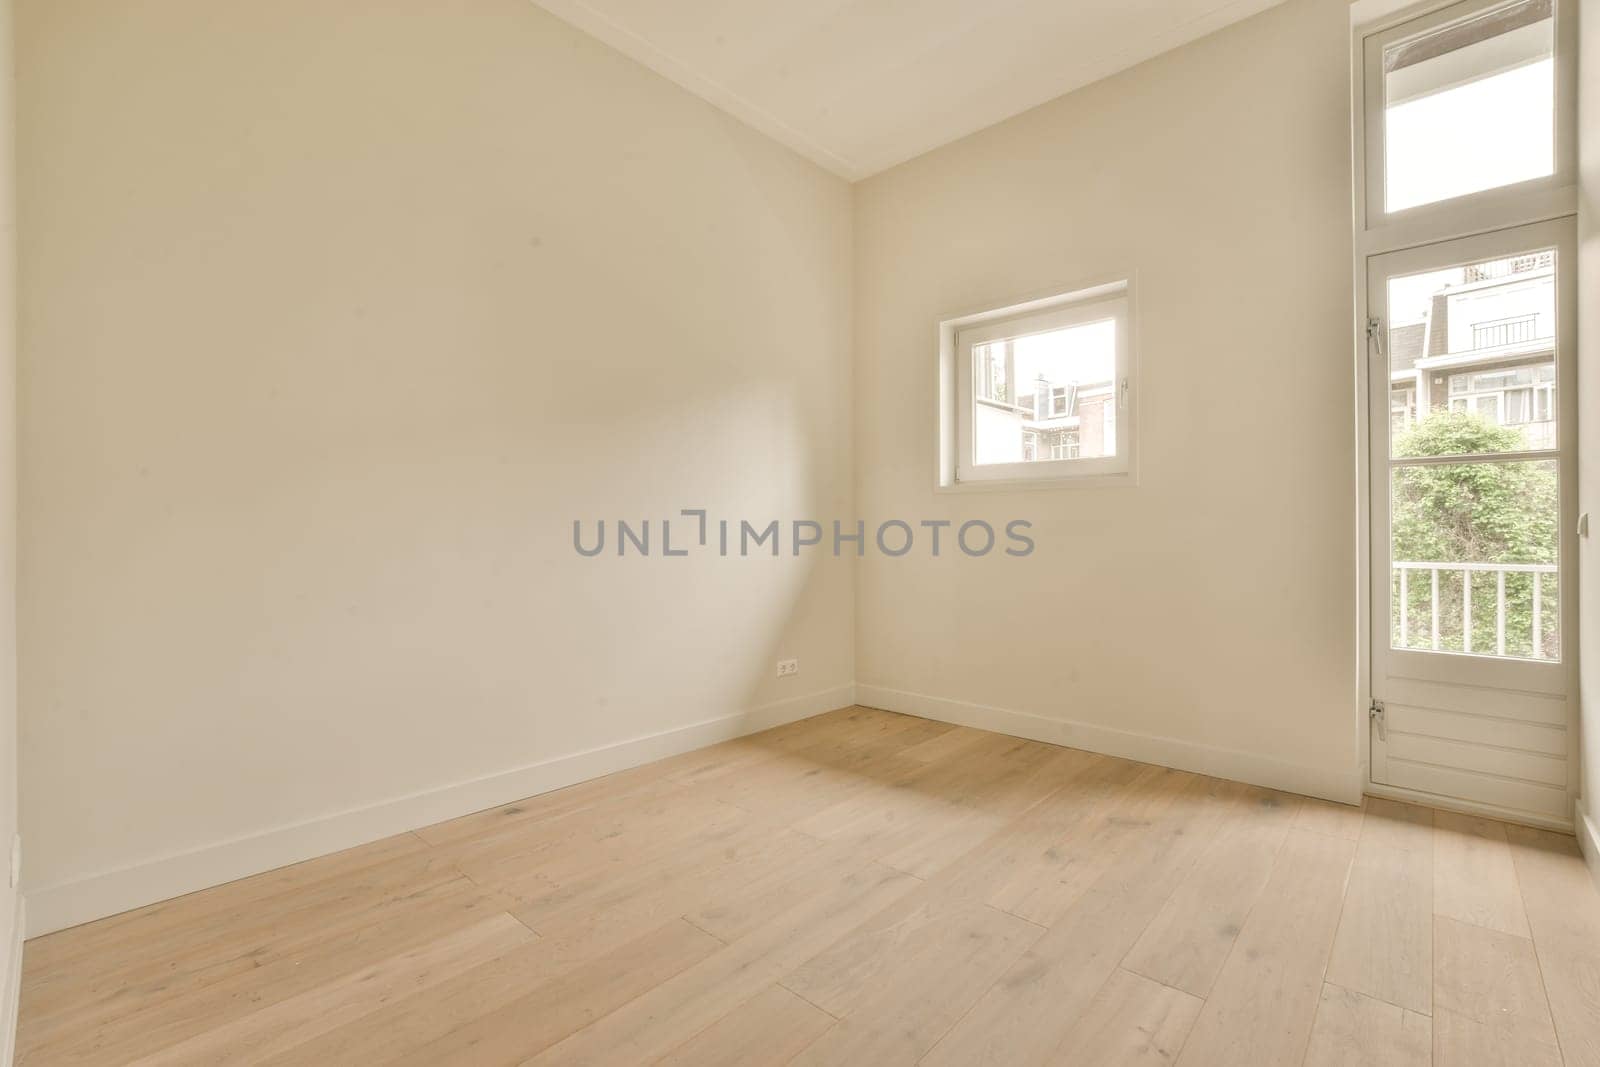 an empty room with white walls and wood flooring on the right side, there is a window in the corner